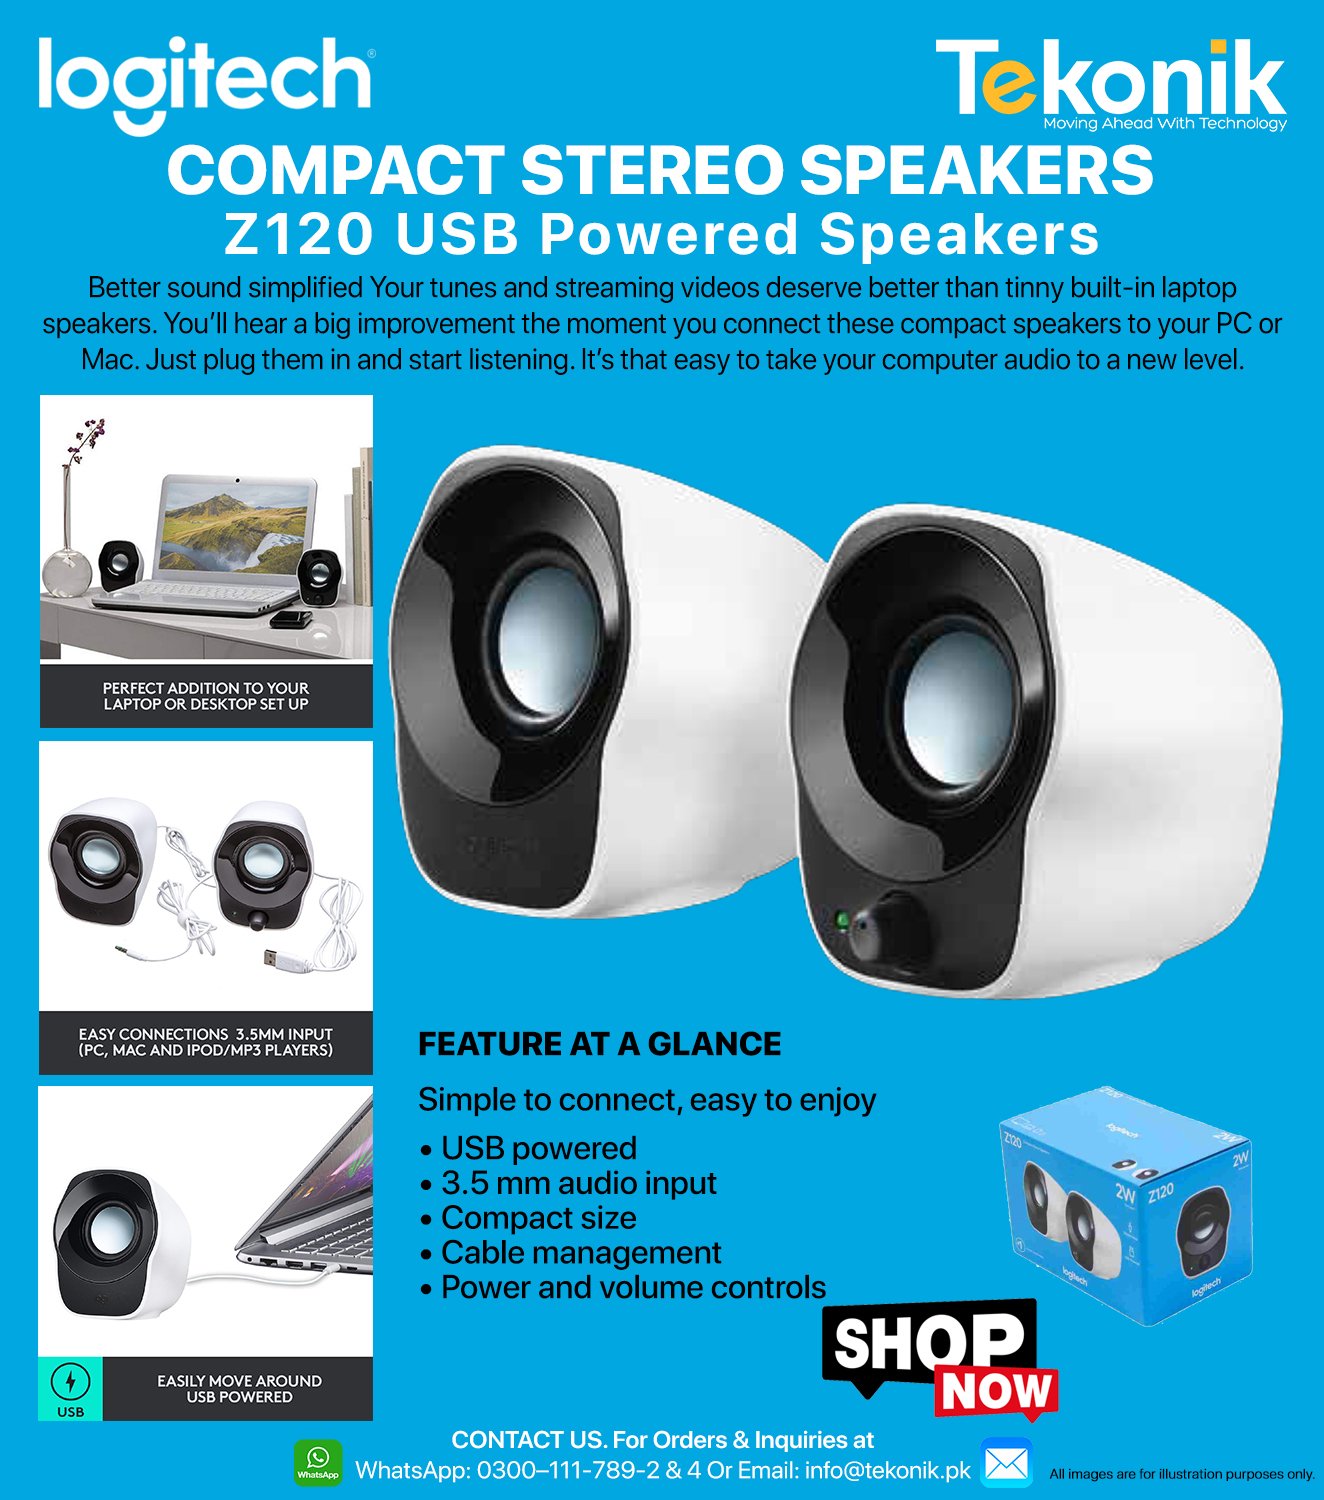 Tekonik on Twitter: "Logitech Z120 Compact Stereo USB Powered Speakers ━ 𝗖𝗢𝗡𝗧𝗔𝗖𝗧 𝗨𝗦. For orders &amp; inquiries WhatsApp: 0300–111-789-2 – ━ Email: info@tekonik.pk #logitech #z120 #compactspeakers #speakers #PCSpeakers #USBspeakers ...